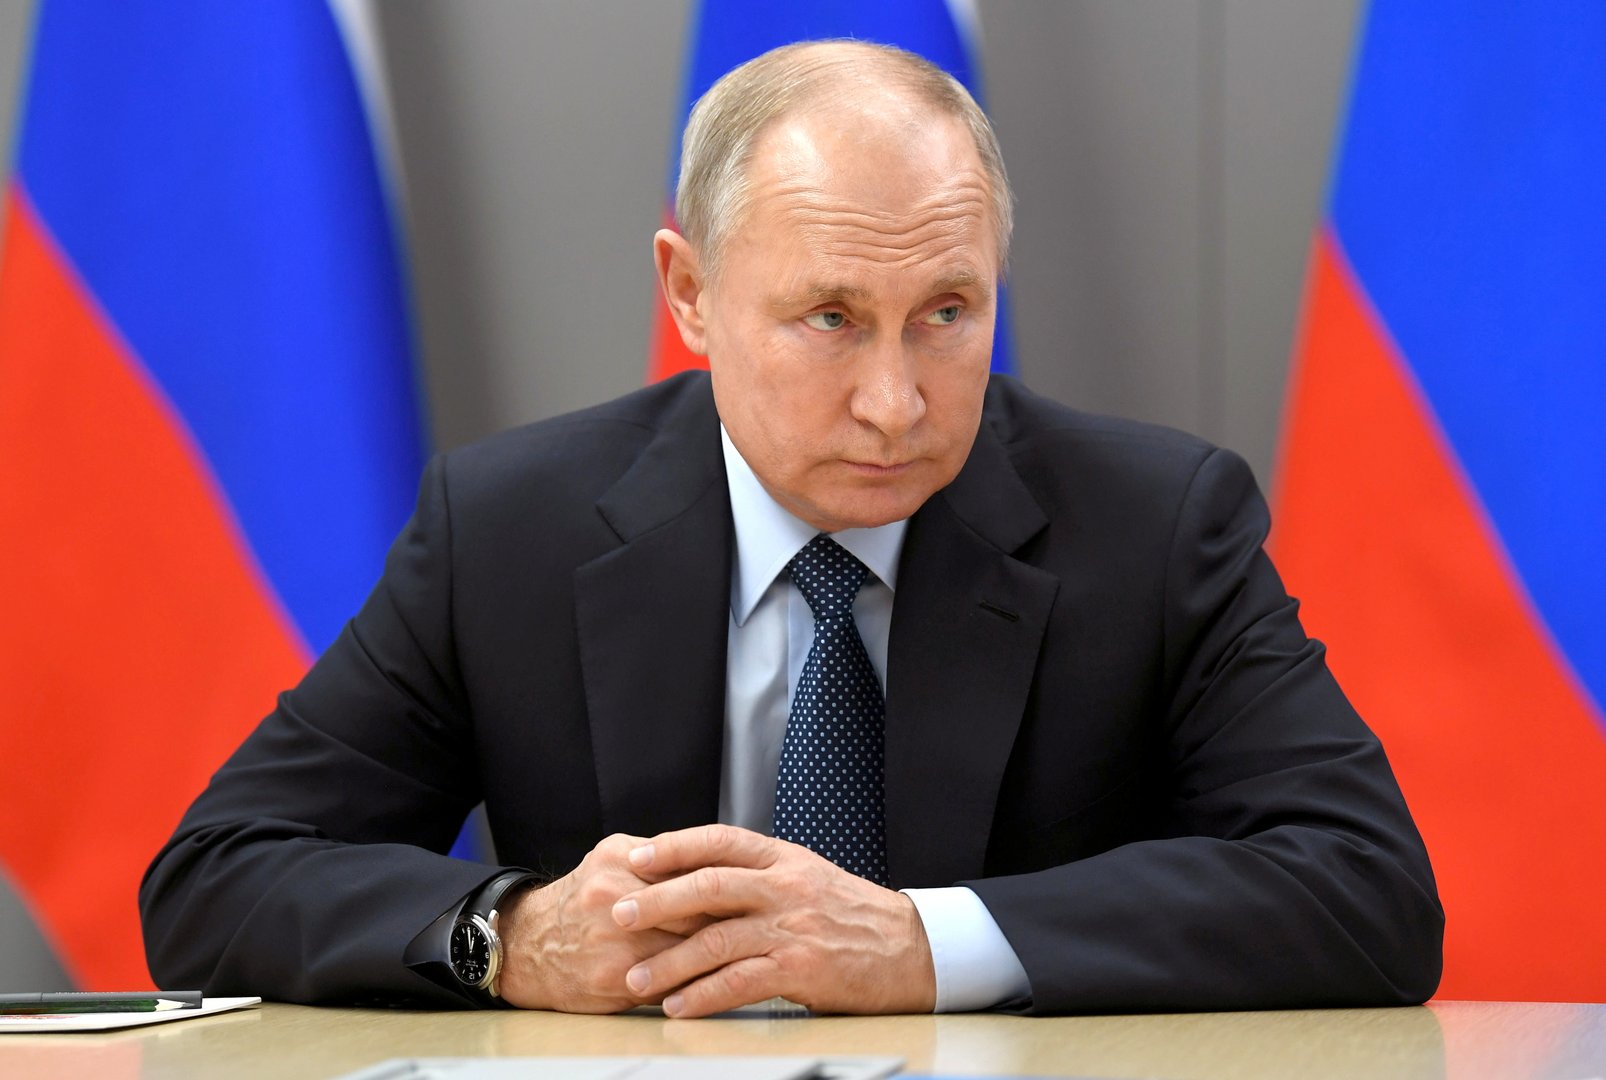 image Putin says Covid trend is getting worse, Kremlin pushes revaccination